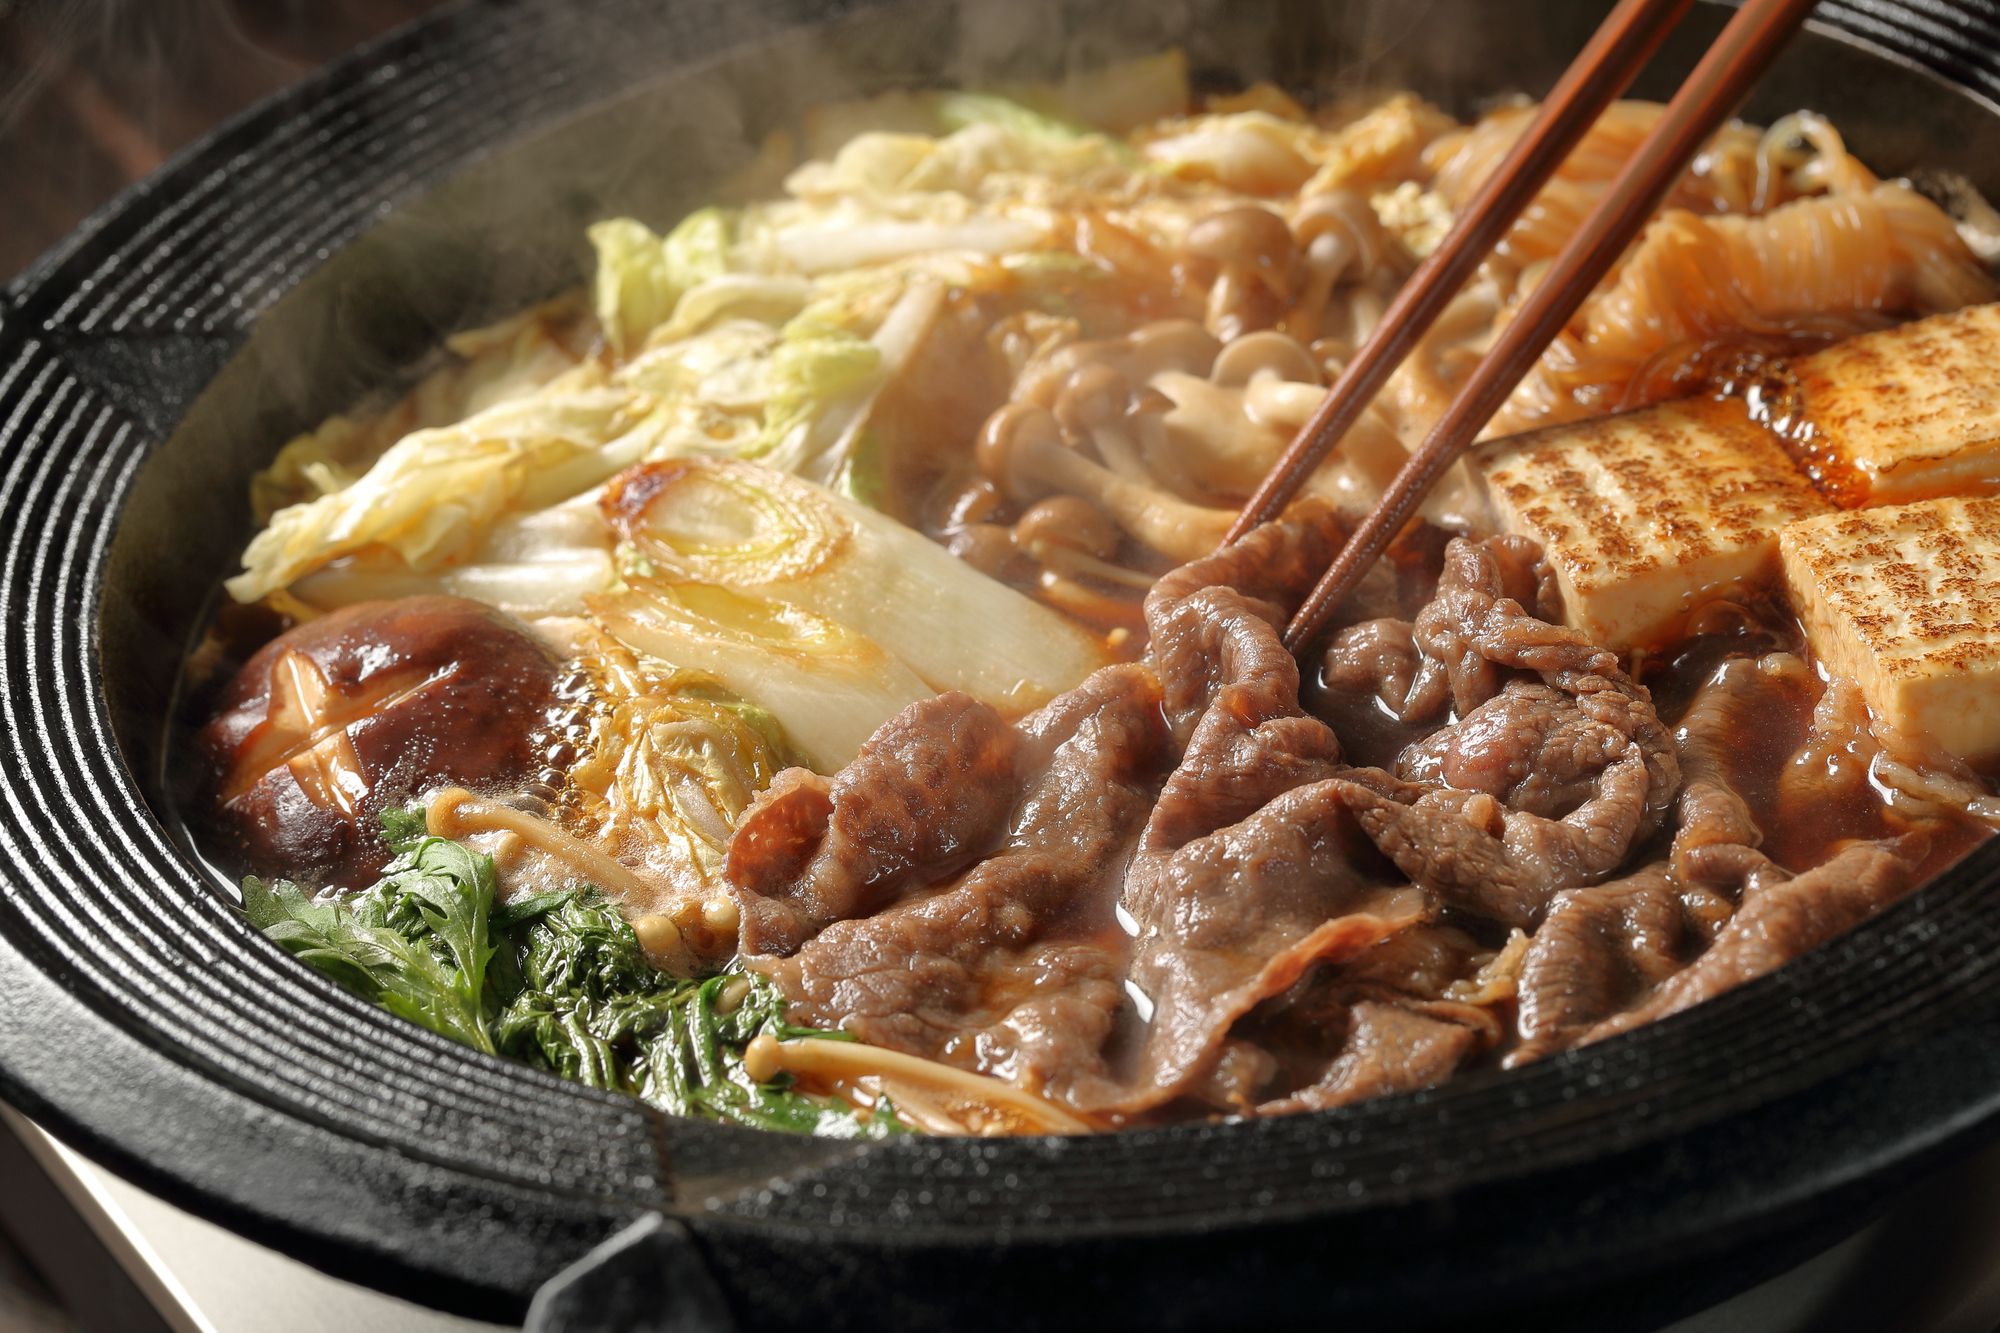 A Complete Guide to Nabe (Hot Pot): Delicious, Traditional Winter